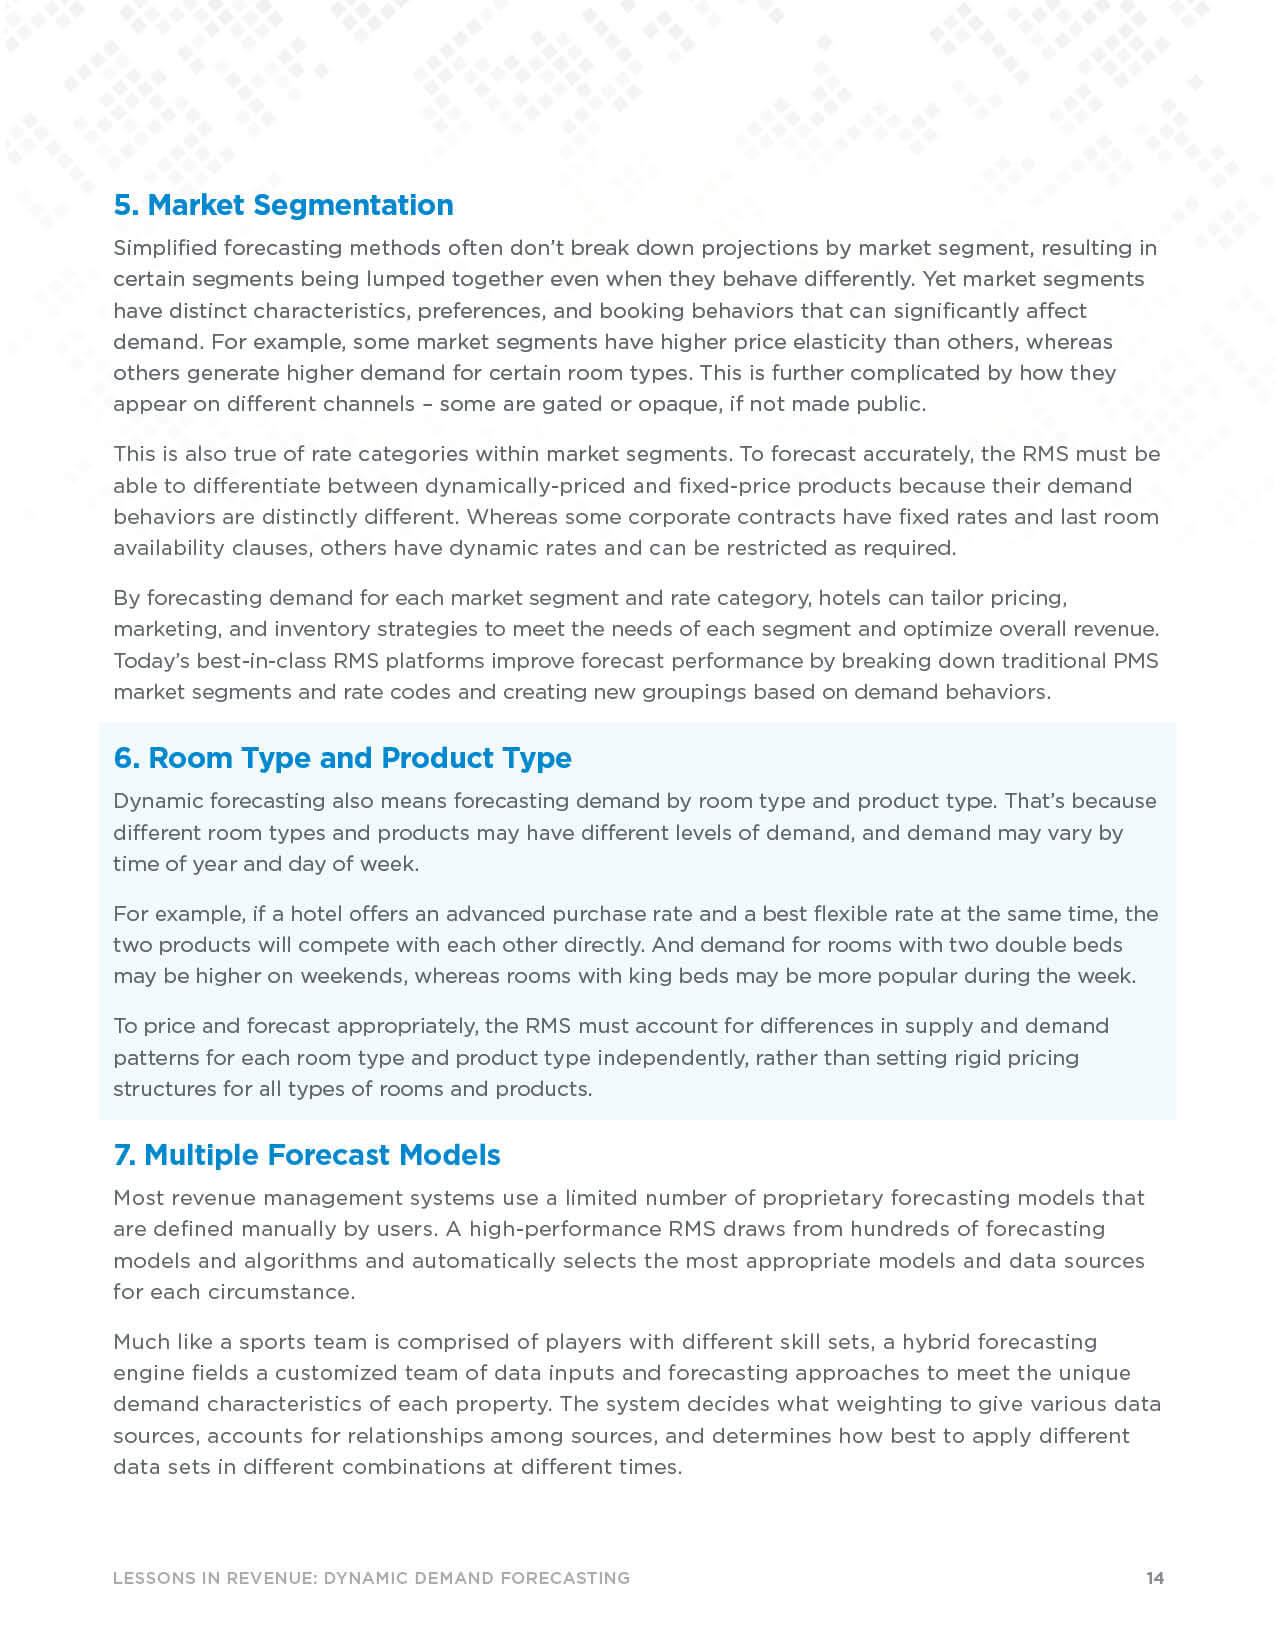 Page 14 - 7 Key Considerations in Dynamic Demand Forecasting